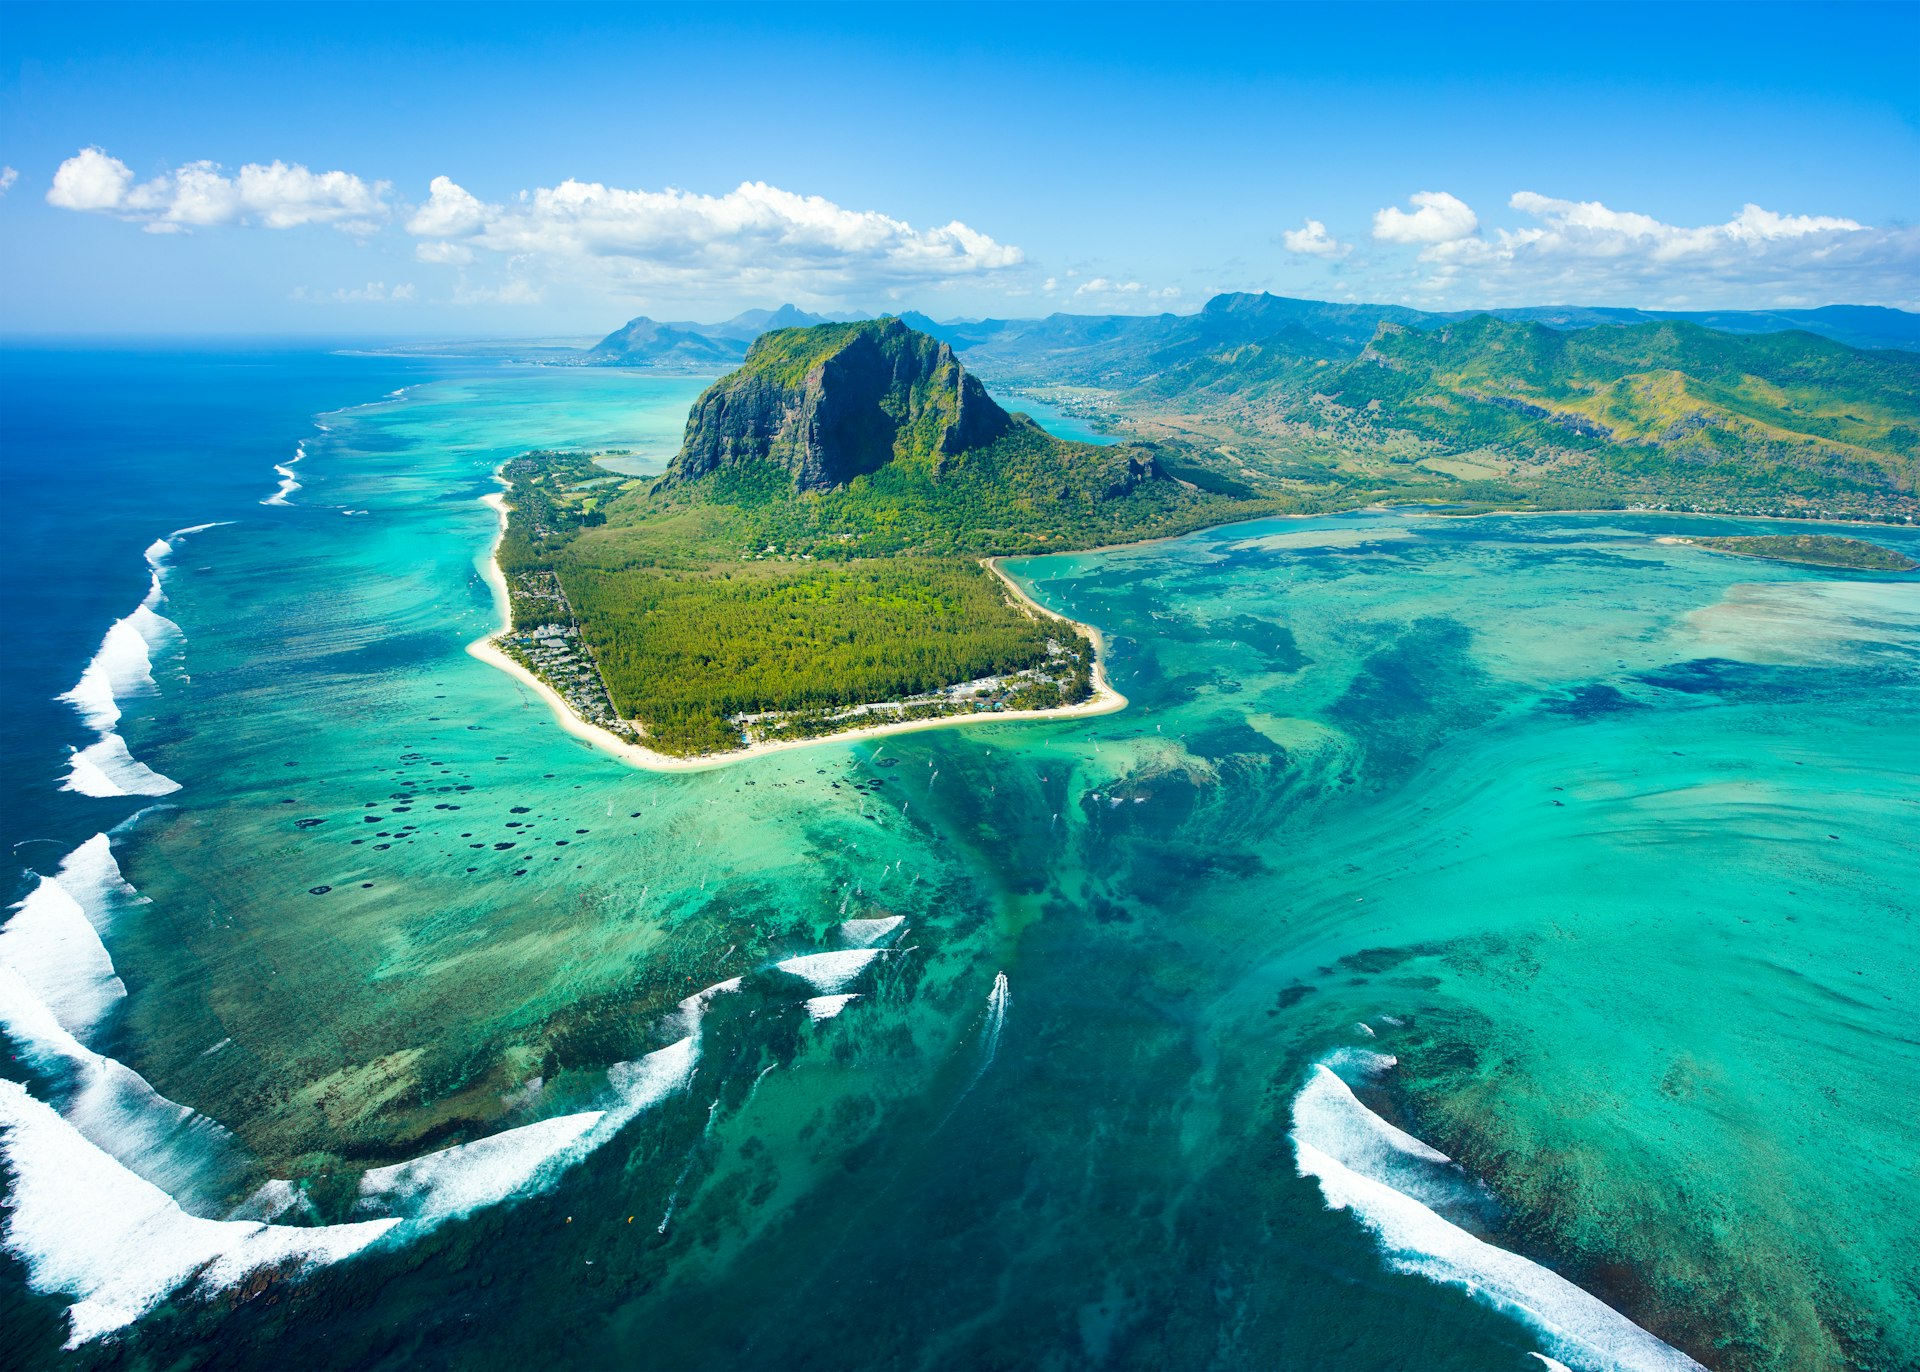 View of the lagoon around Le Morne Brabant on Mauritius